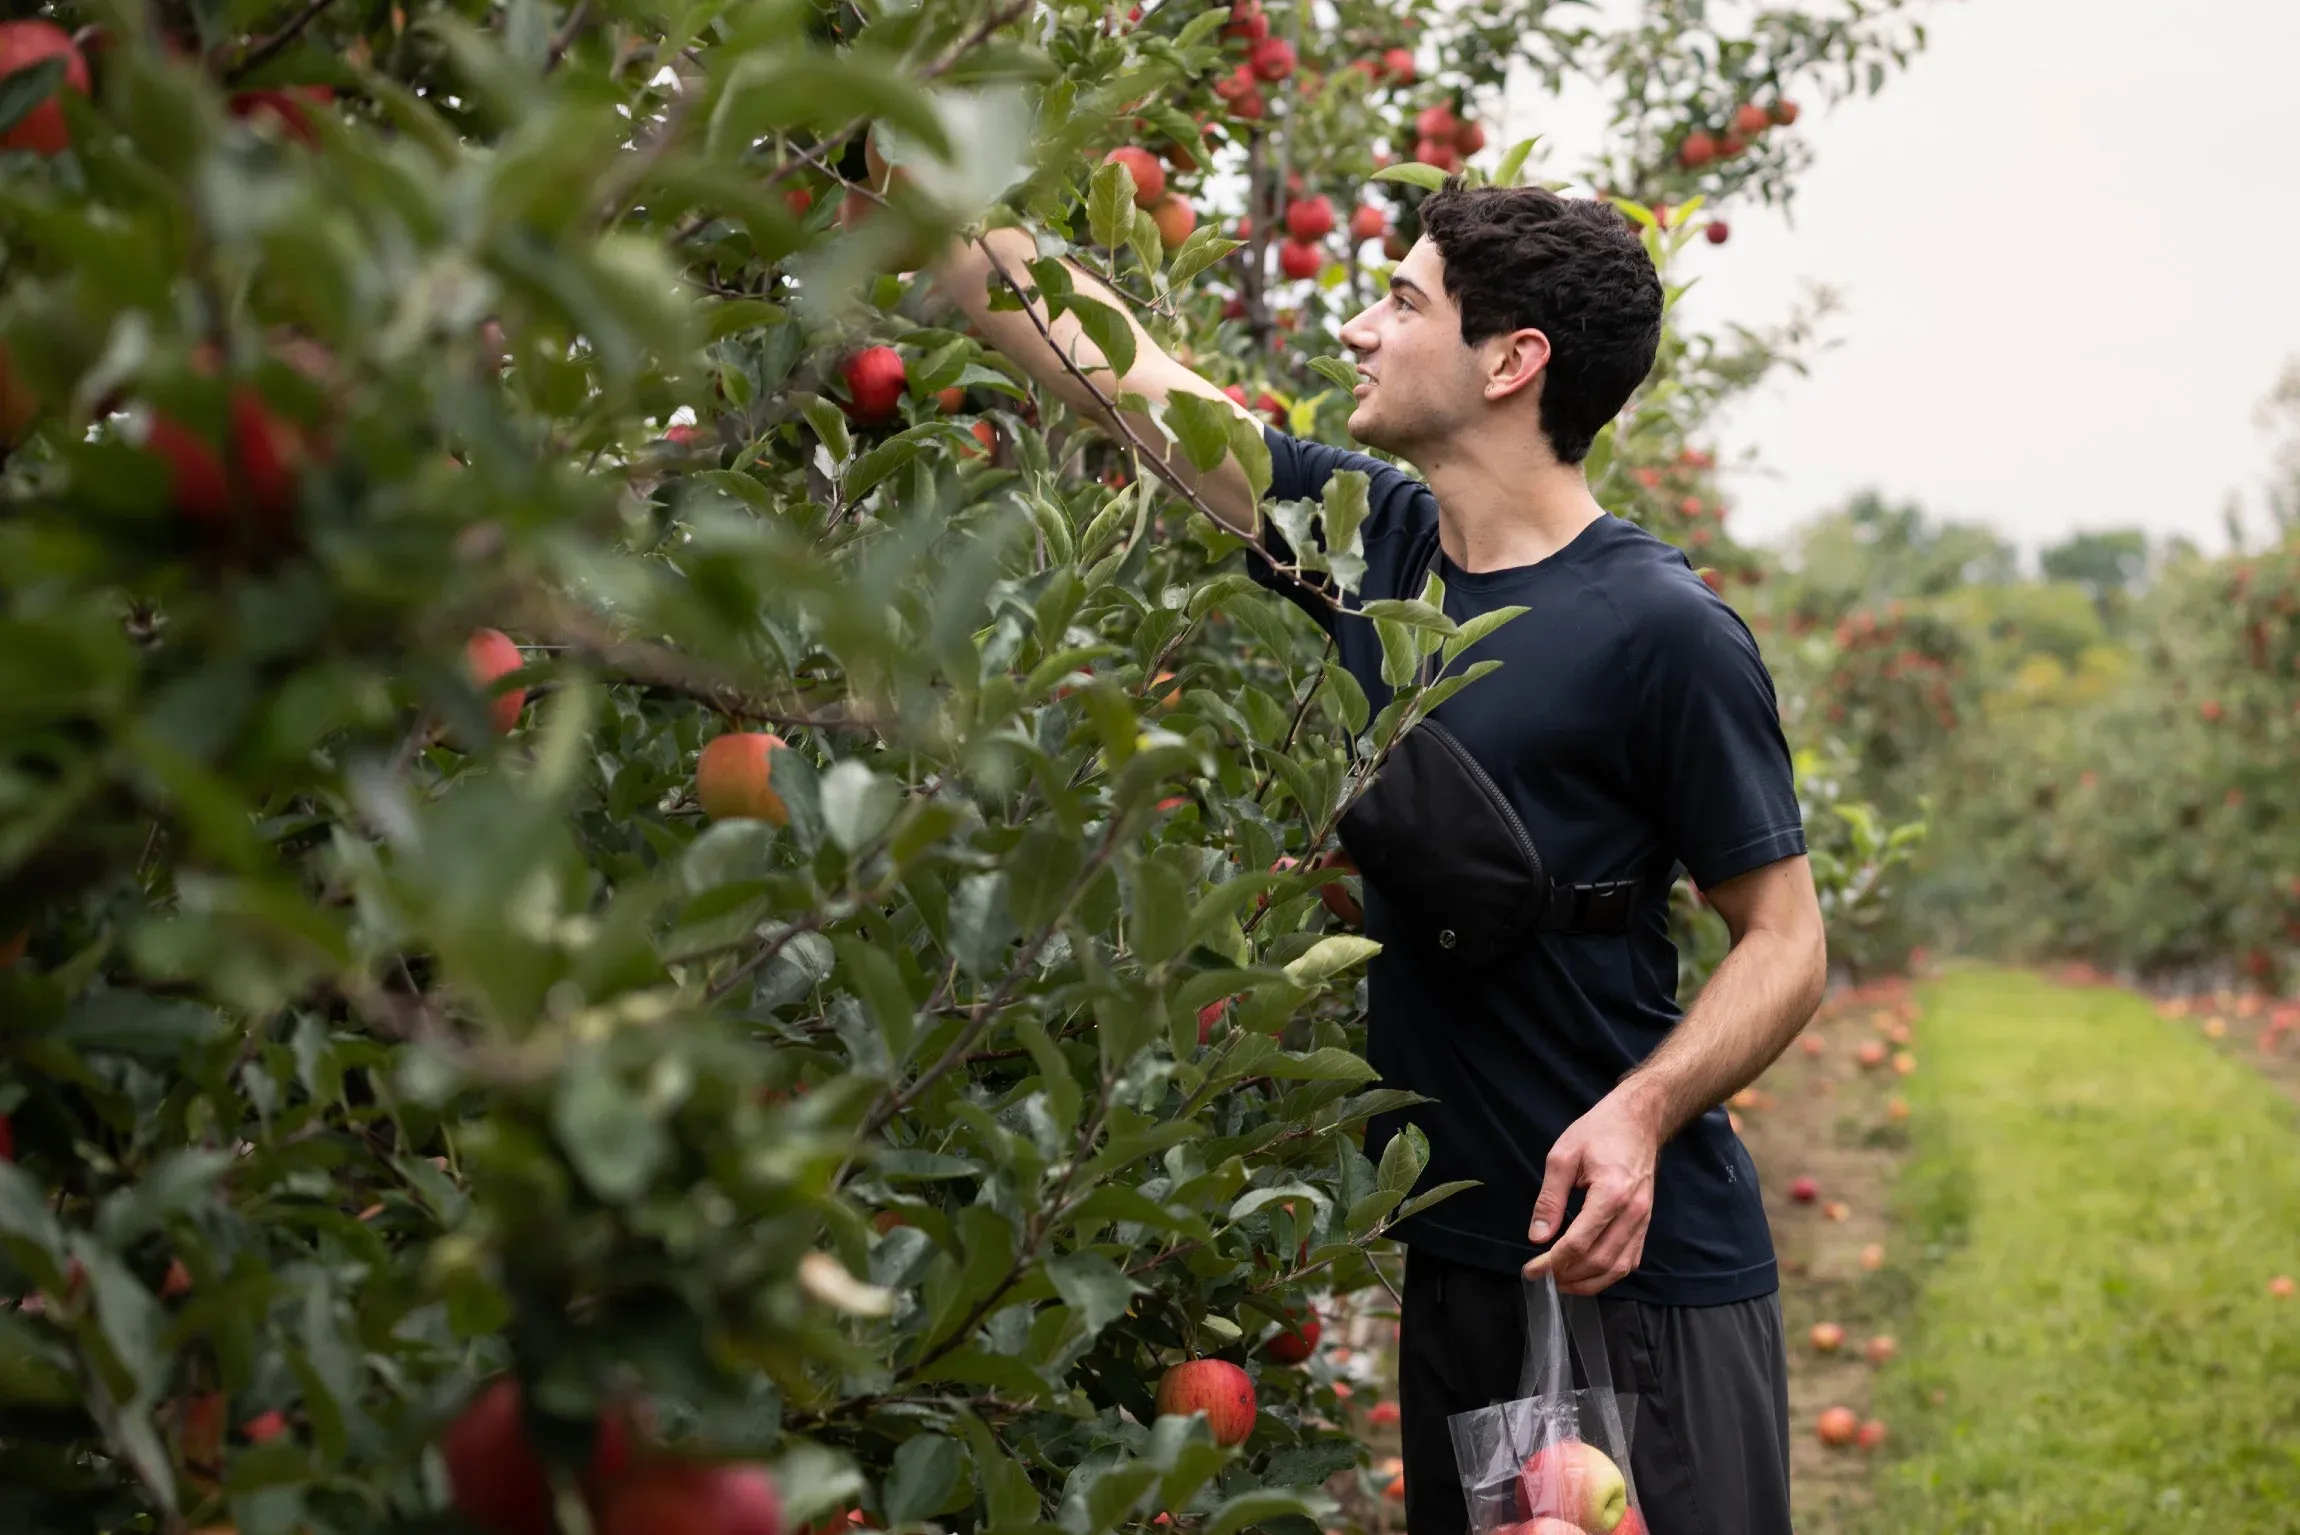 Student reaching into an apple tree in an apple orchard.